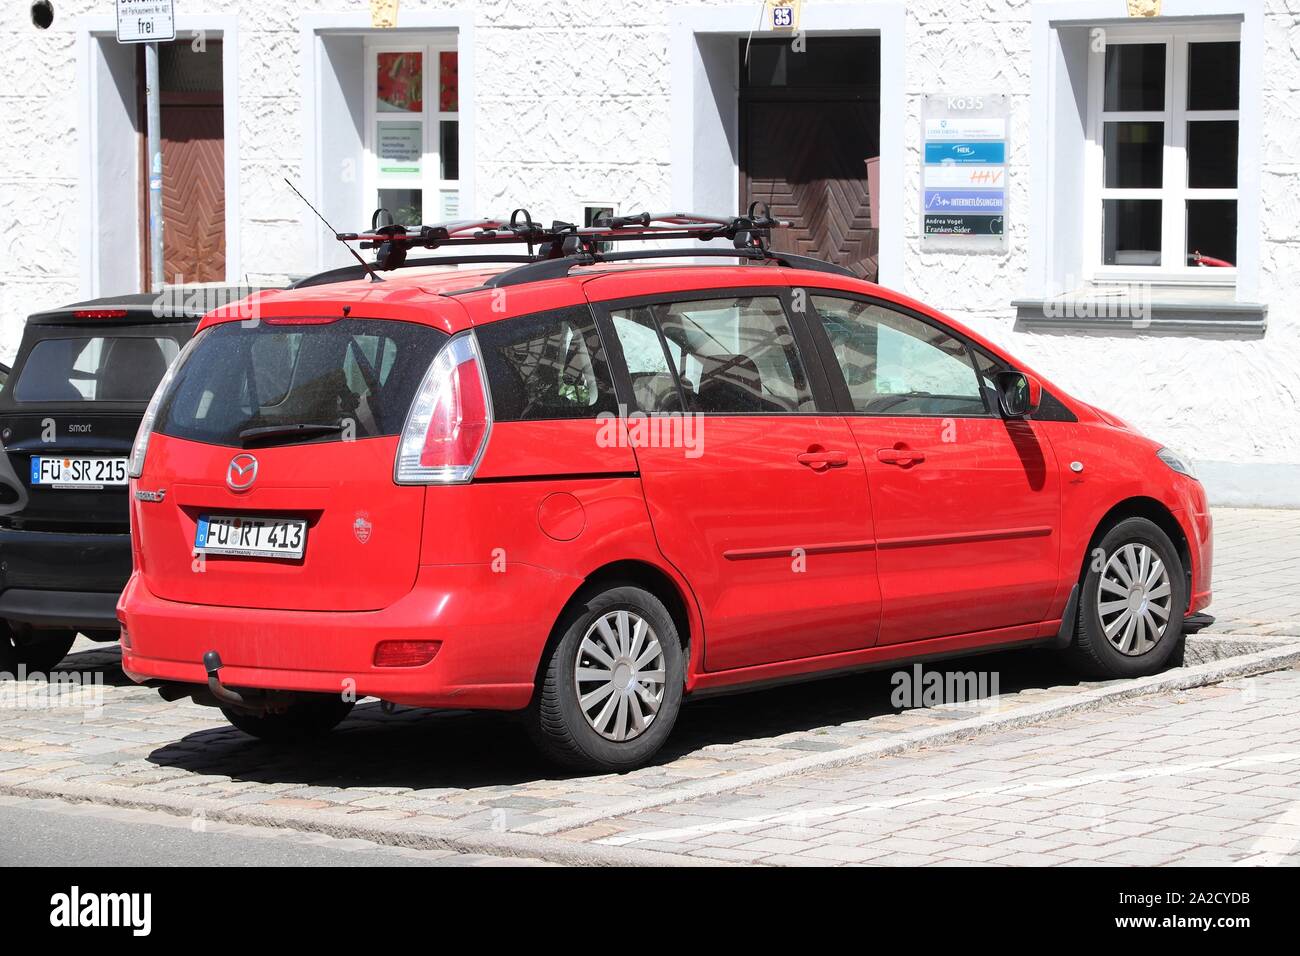 FURTH, GERMANY - MAY 6, 2018: Red Mazda 5 compact MPV family car parked in Germany. There were 45.8 million cars registered in Germany (as of 2017). Stock Photo